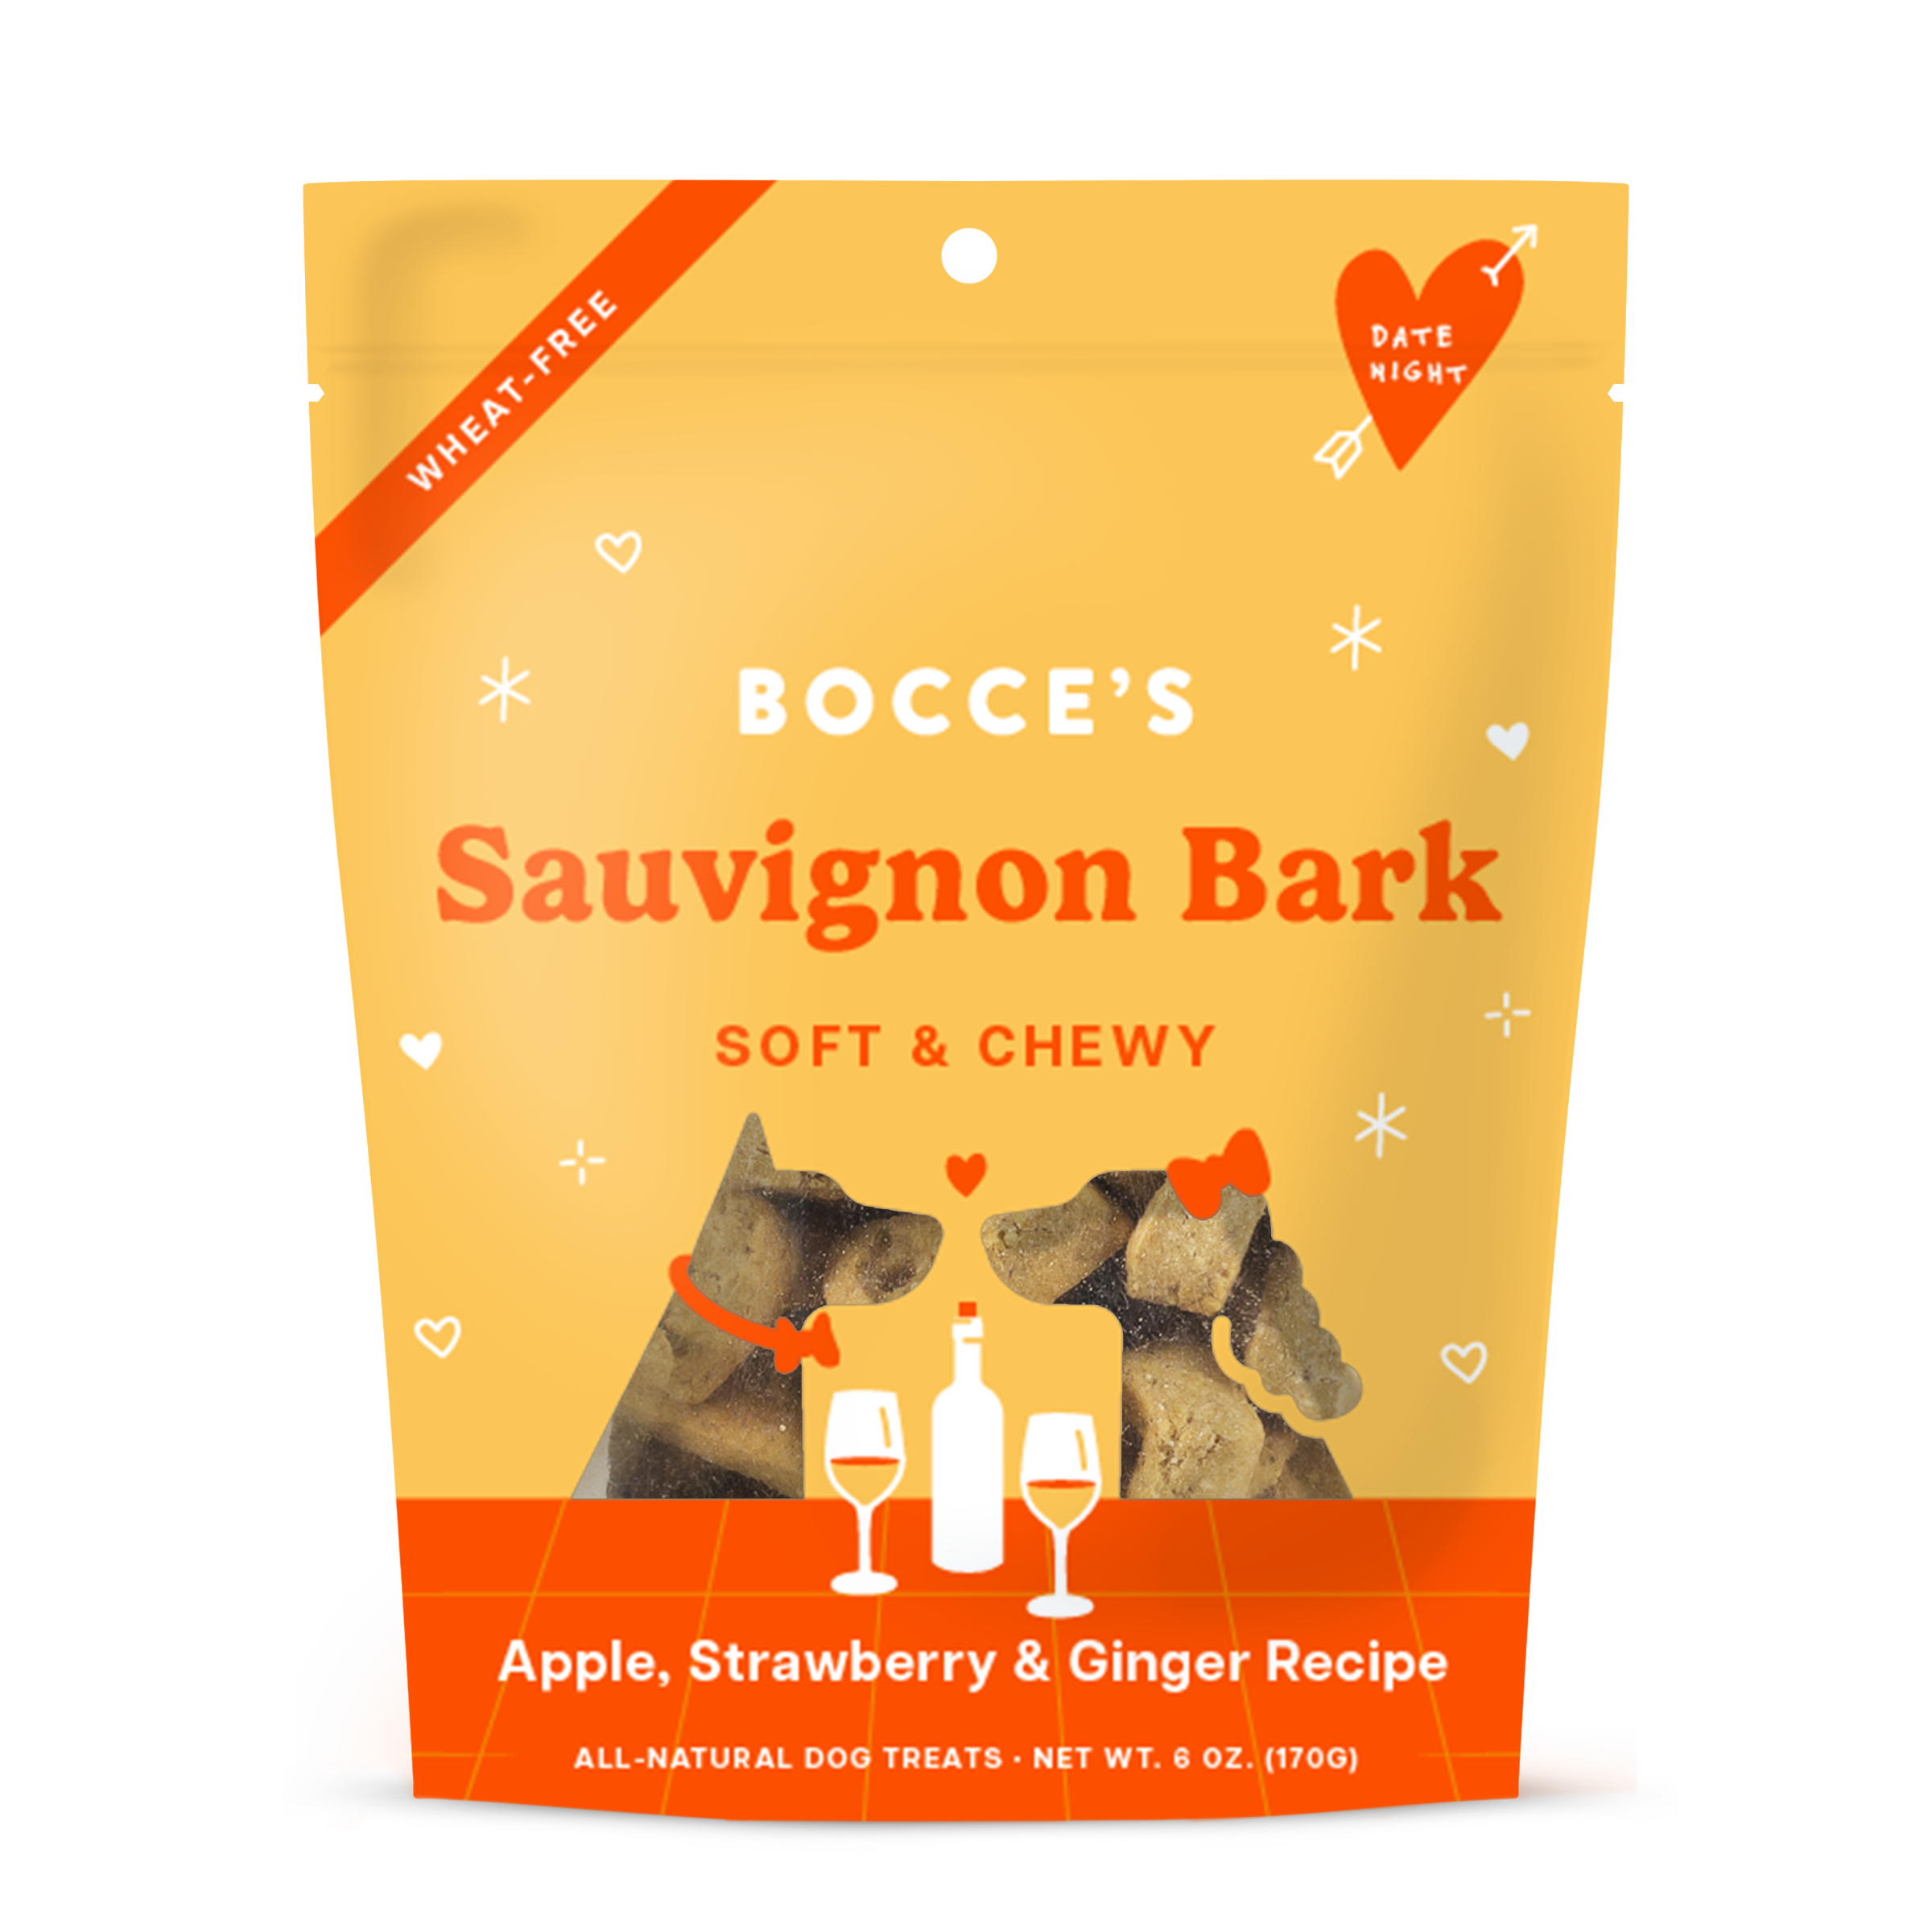 Bocce's Bakery - Sauvignon Bark Soft & Chewy